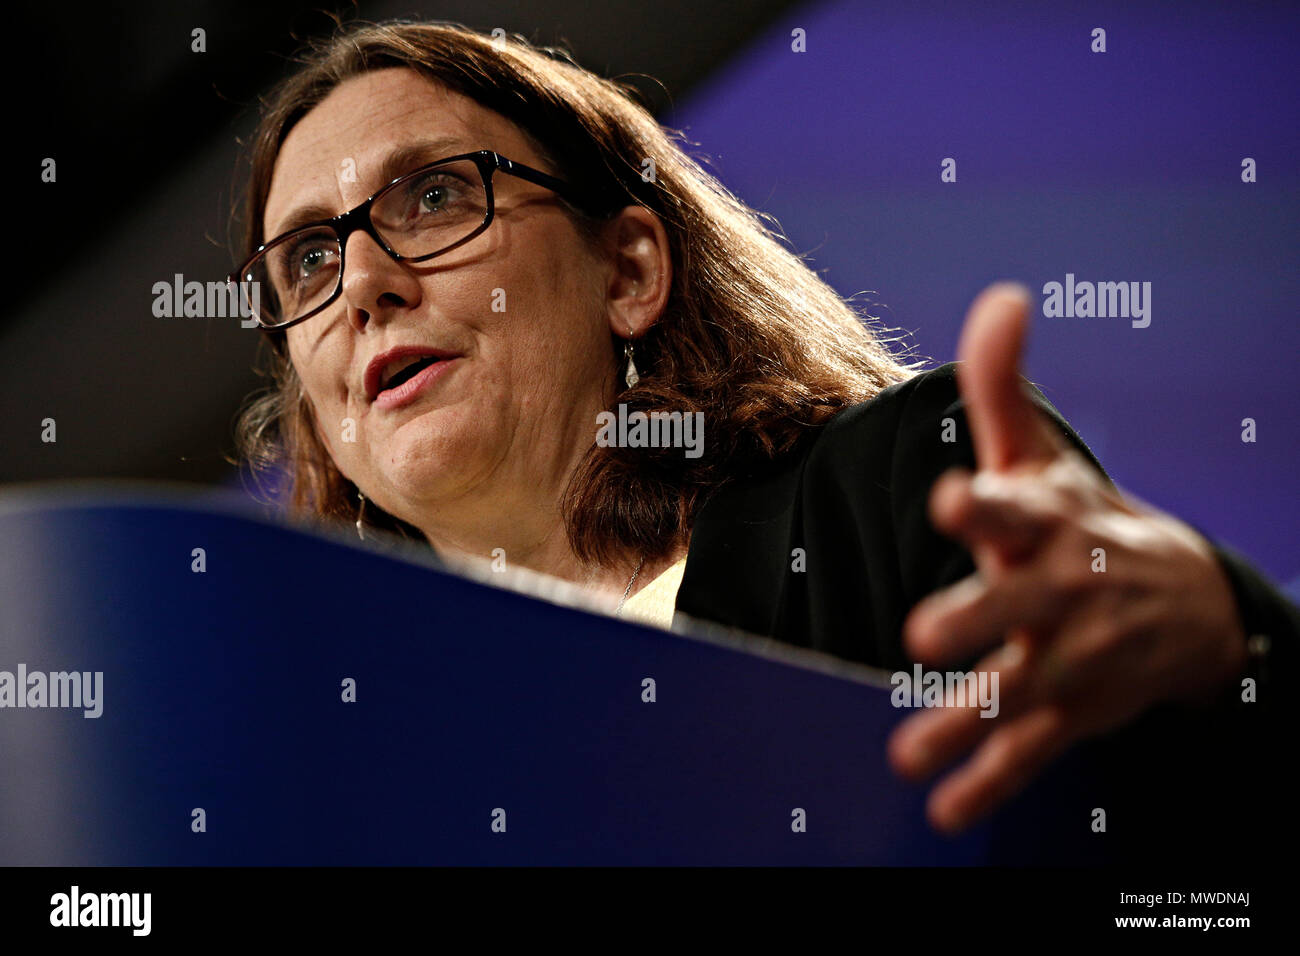 Brussels, Belgium. 1st June, 2018. Press conference by EU Commissioner Cecilia MALMSTROM on the US restrictions on steel and aluminium affecting the European Union. Alexandros Michailidis/Alamy Live News Stock Photo